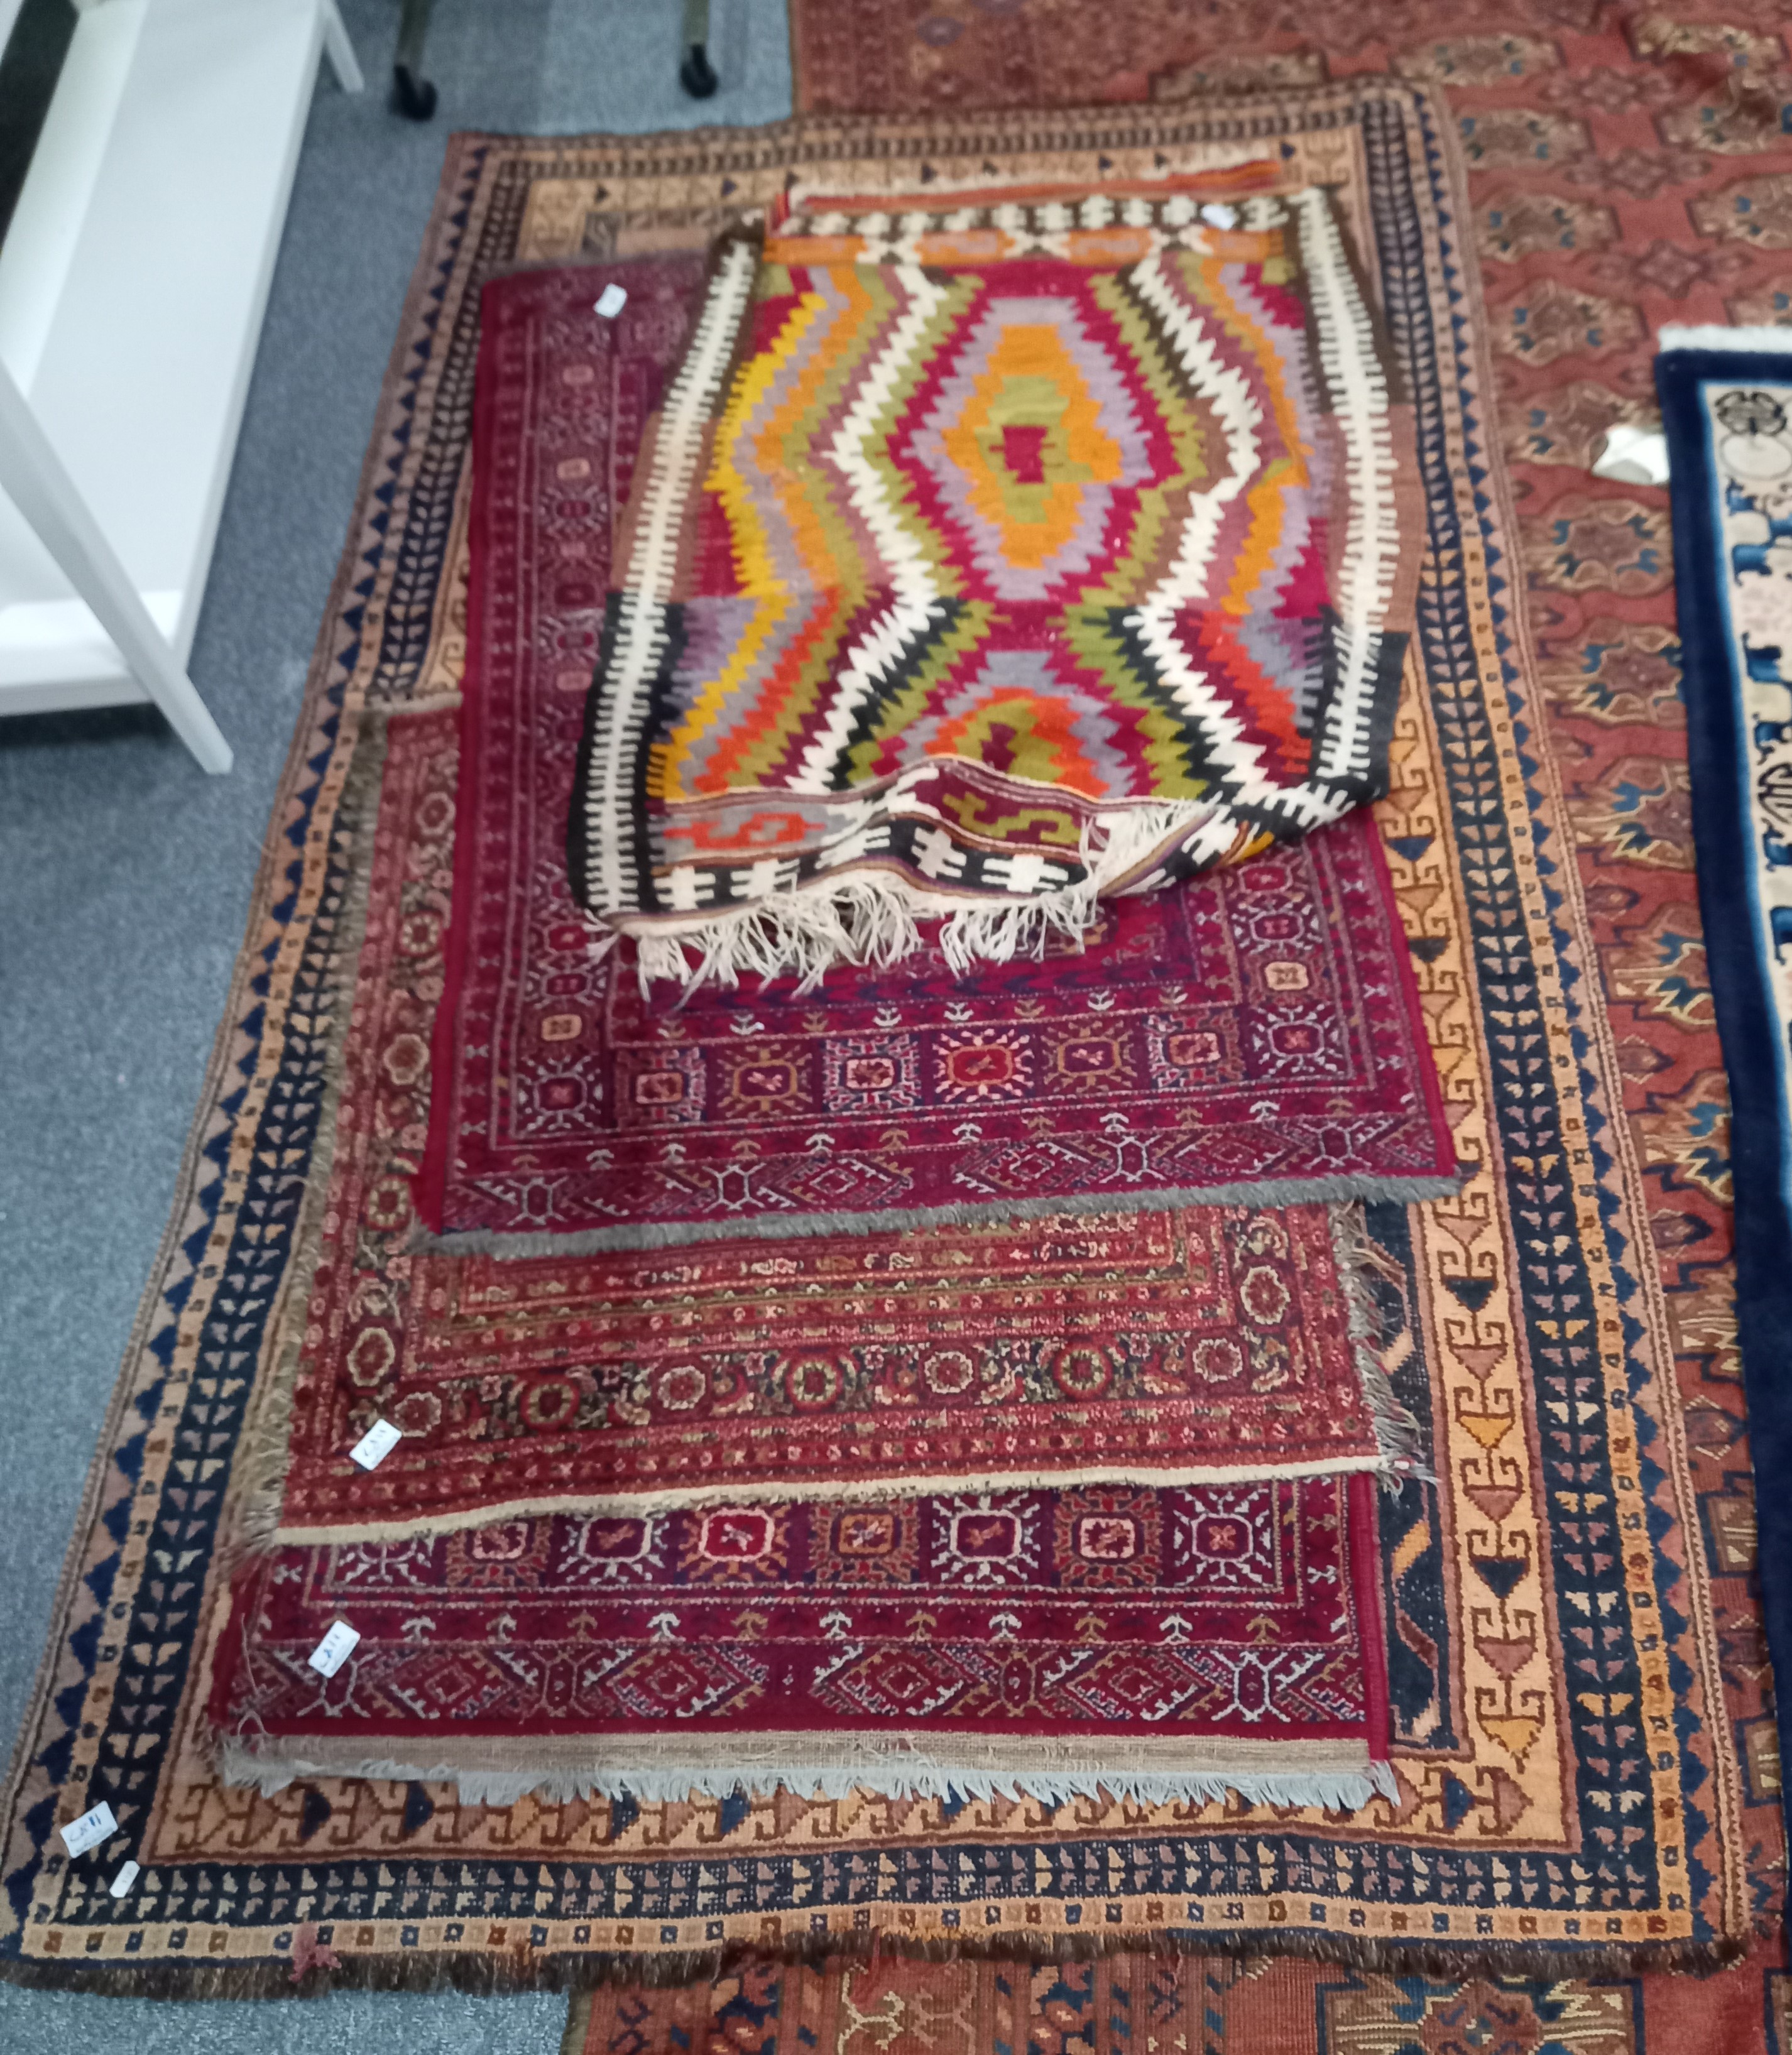 x5 Rugs of various sizes and colours